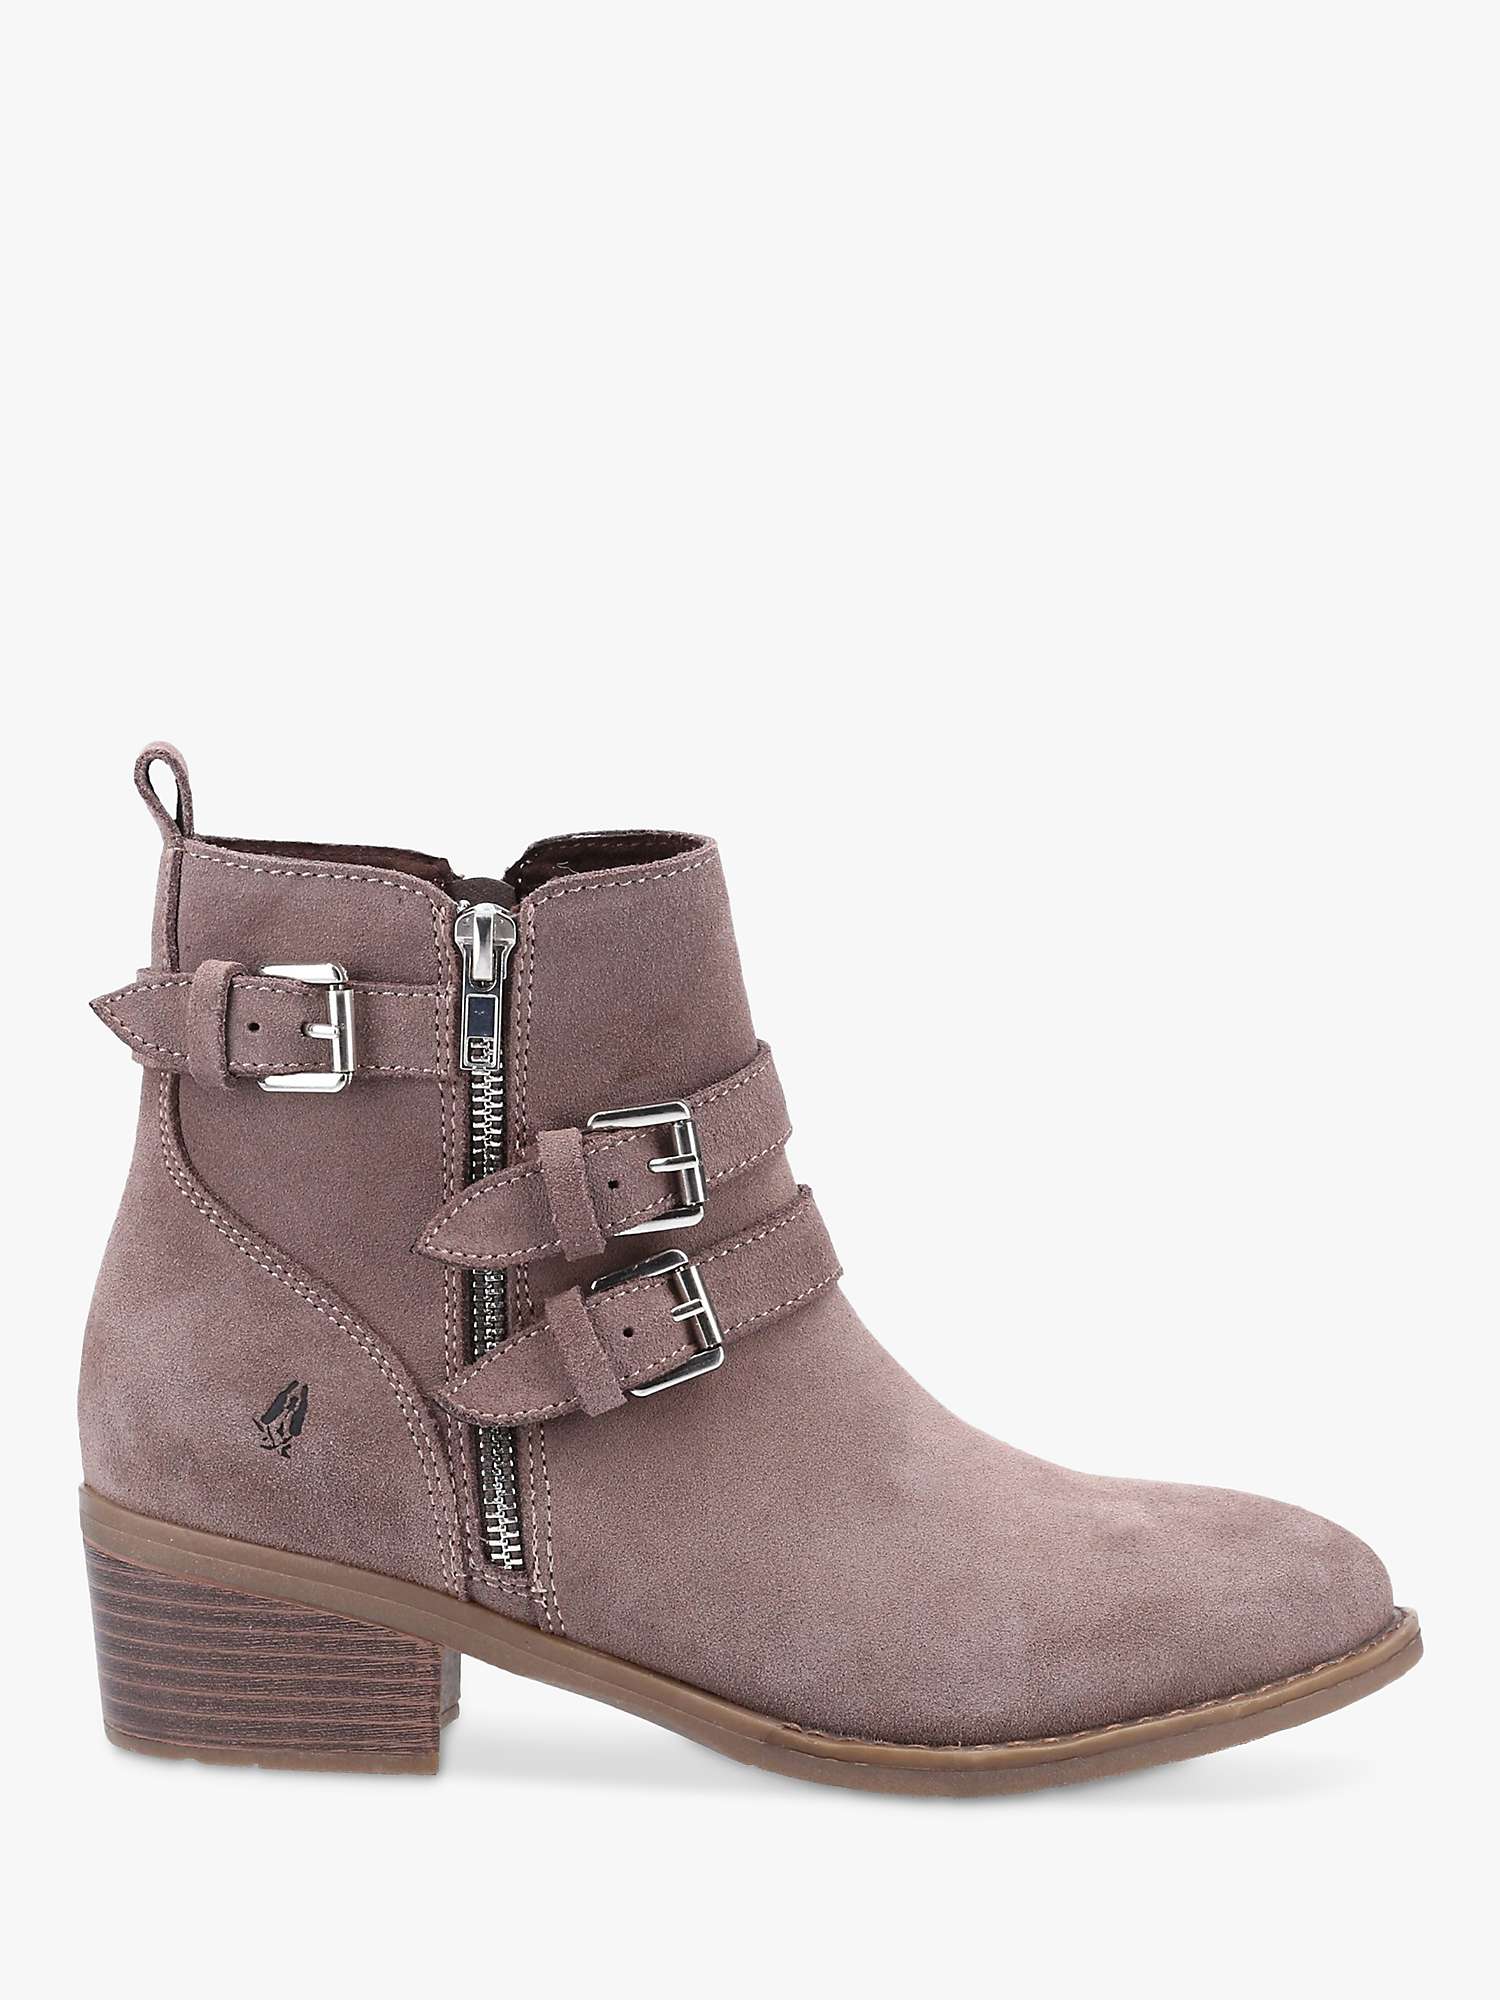 Buy Hush Puppies Jenna Suede Ankle Boots Online at johnlewis.com